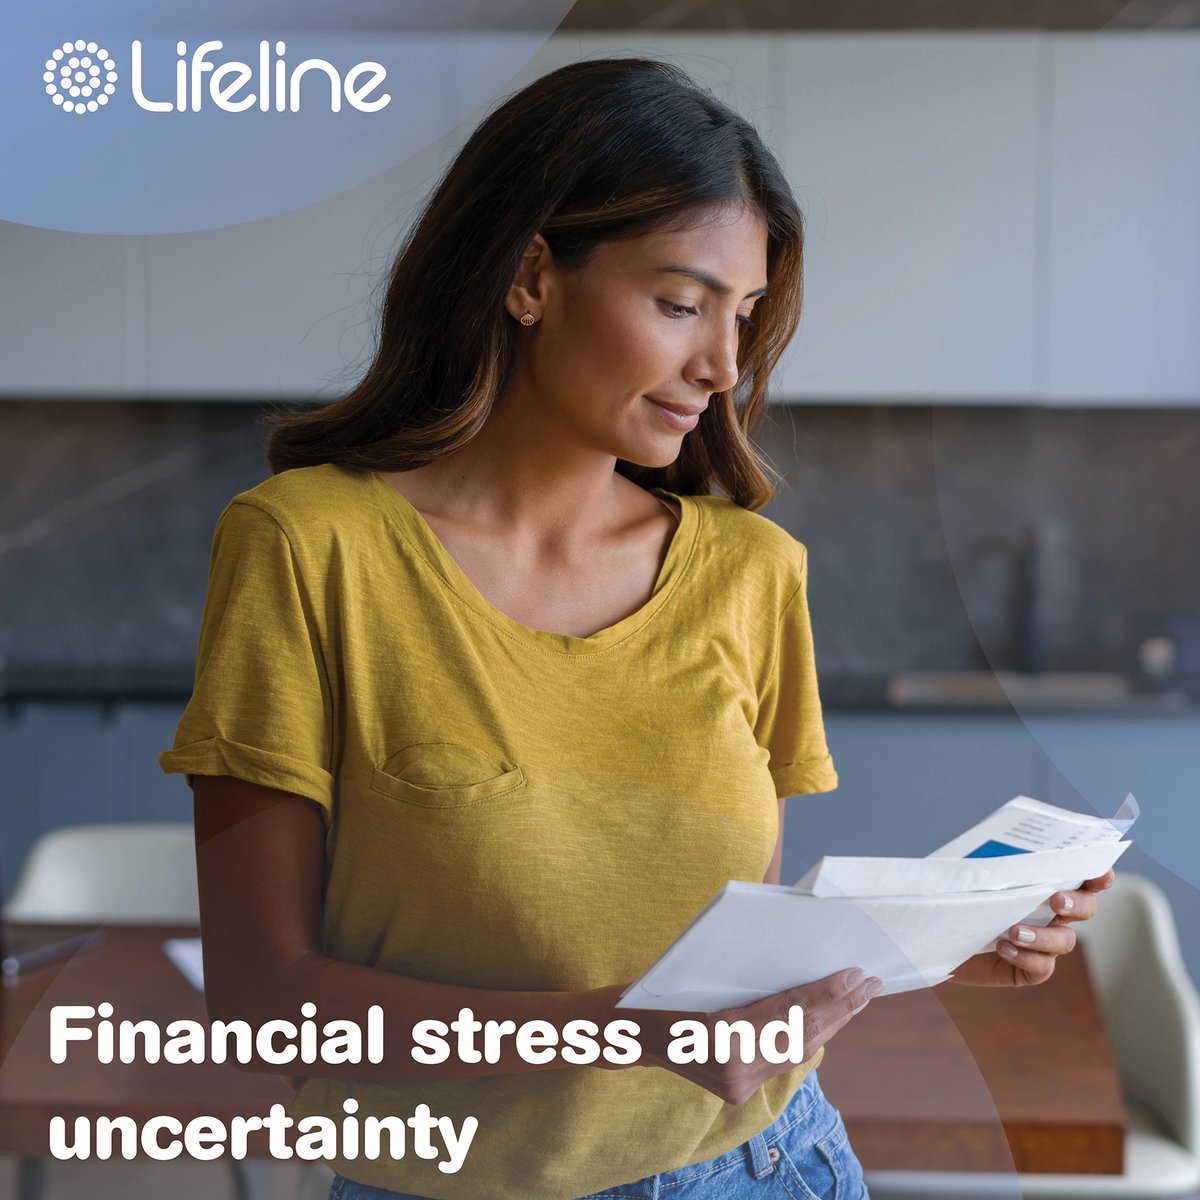 The cost of living crisis continues to cause financial stress across the country, it is important to know the signs, causes and ways you can manage these feelings. Learn more about financial stress via our Support Toolkit here: toolkit.lifeline.org.au/topics/financi…